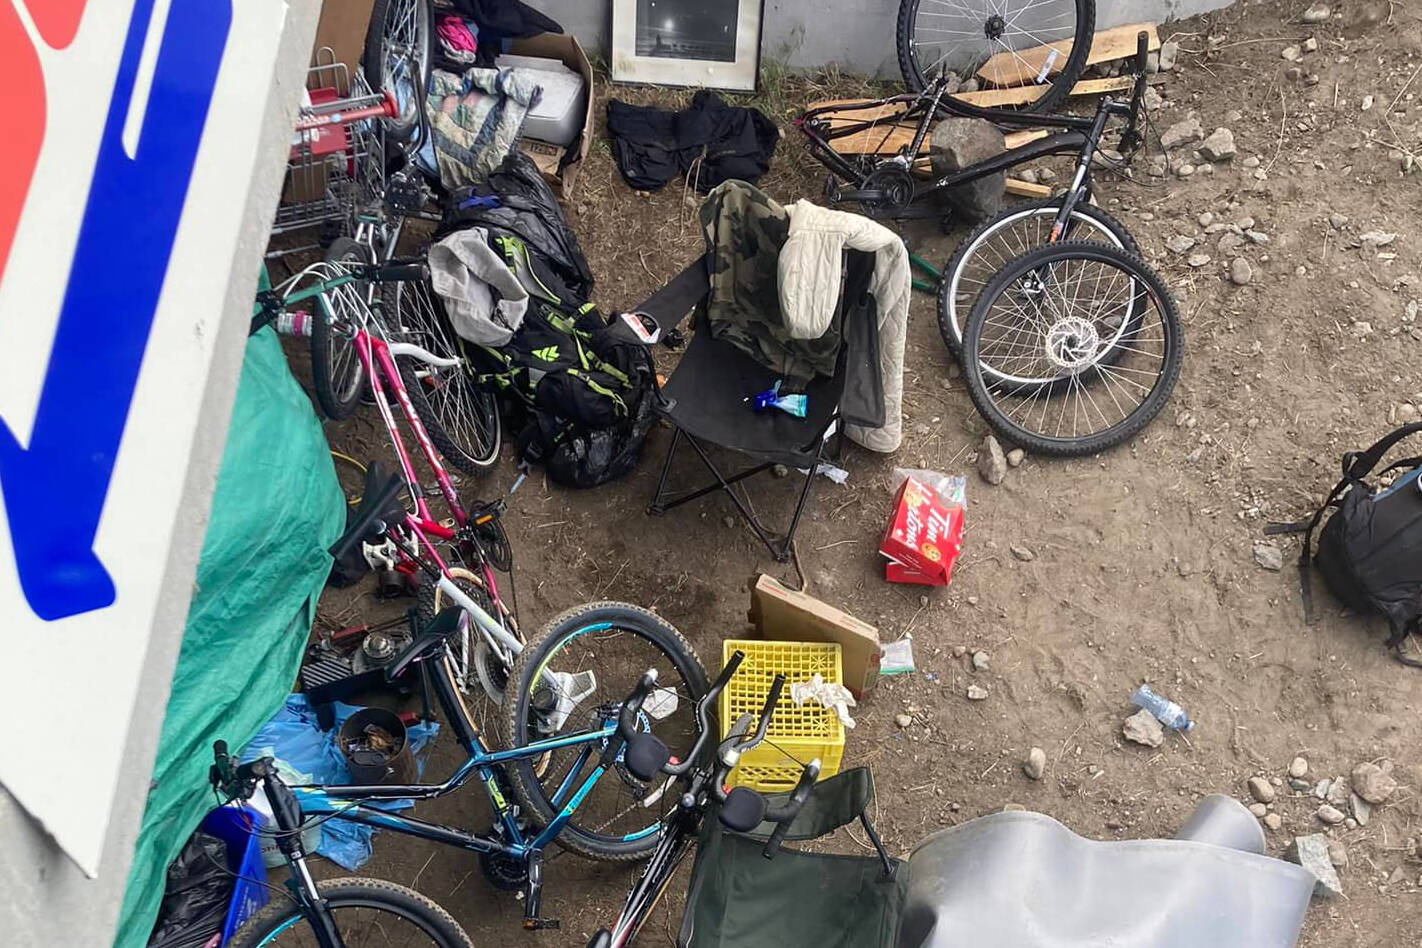 A Penticton resident took this photo of the assortment of bikes at an encampment underneath the Green Mountain Road bridge at the Channel Parkway in Penticton. Bylaw officers recognize this camp is gathering a high amount of stolen goods. (Facebook)